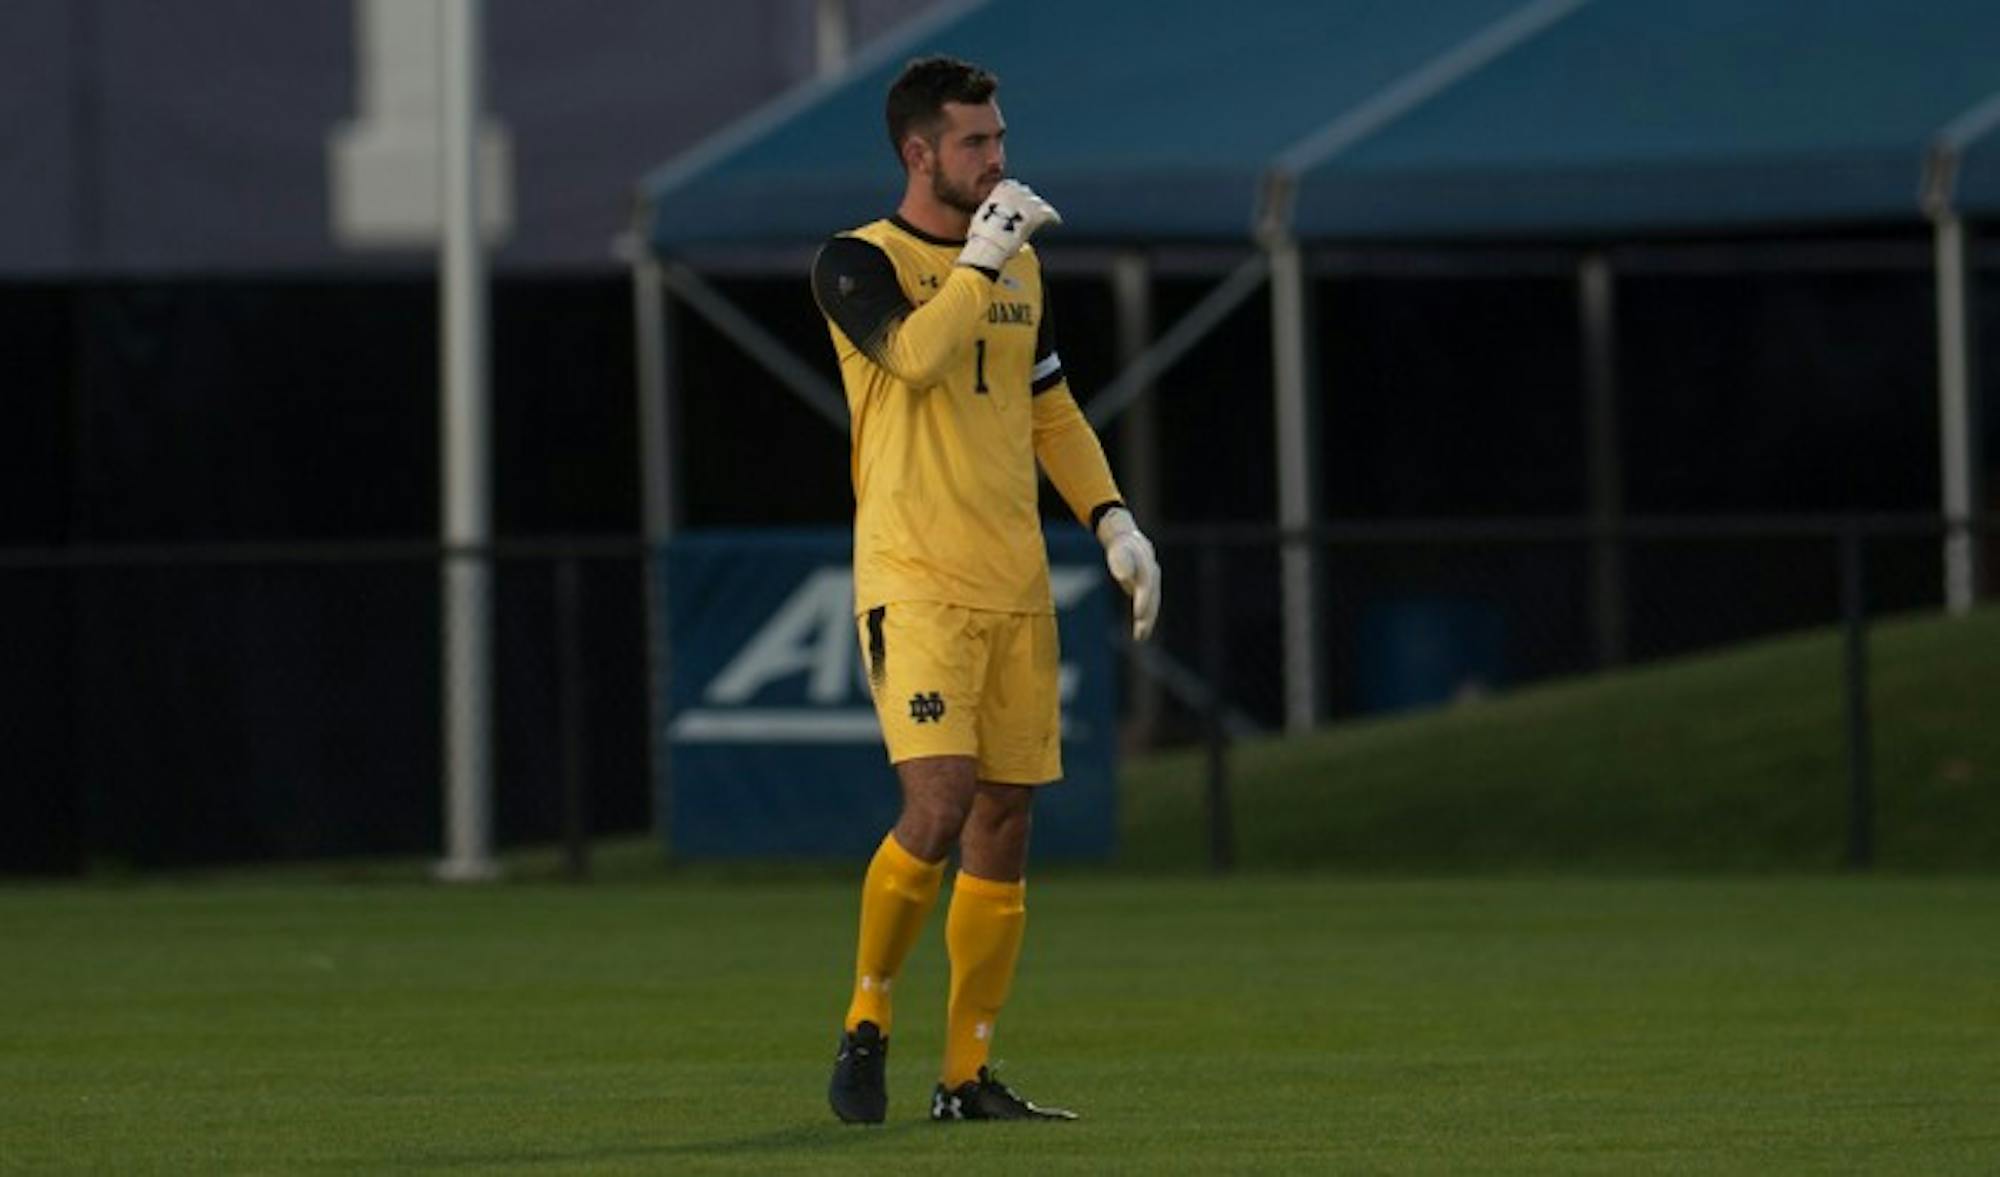 Irish graduate student goalkeeper Chris Hubbard surveys the field during Notre Dame’s 3-0 win over North Carolina State on Sept. 15 at Alumni Stadium. Hubbard has 18 saves in seven games for the Irish this season, including five saves during Friday’s loss to Virginia Tech.